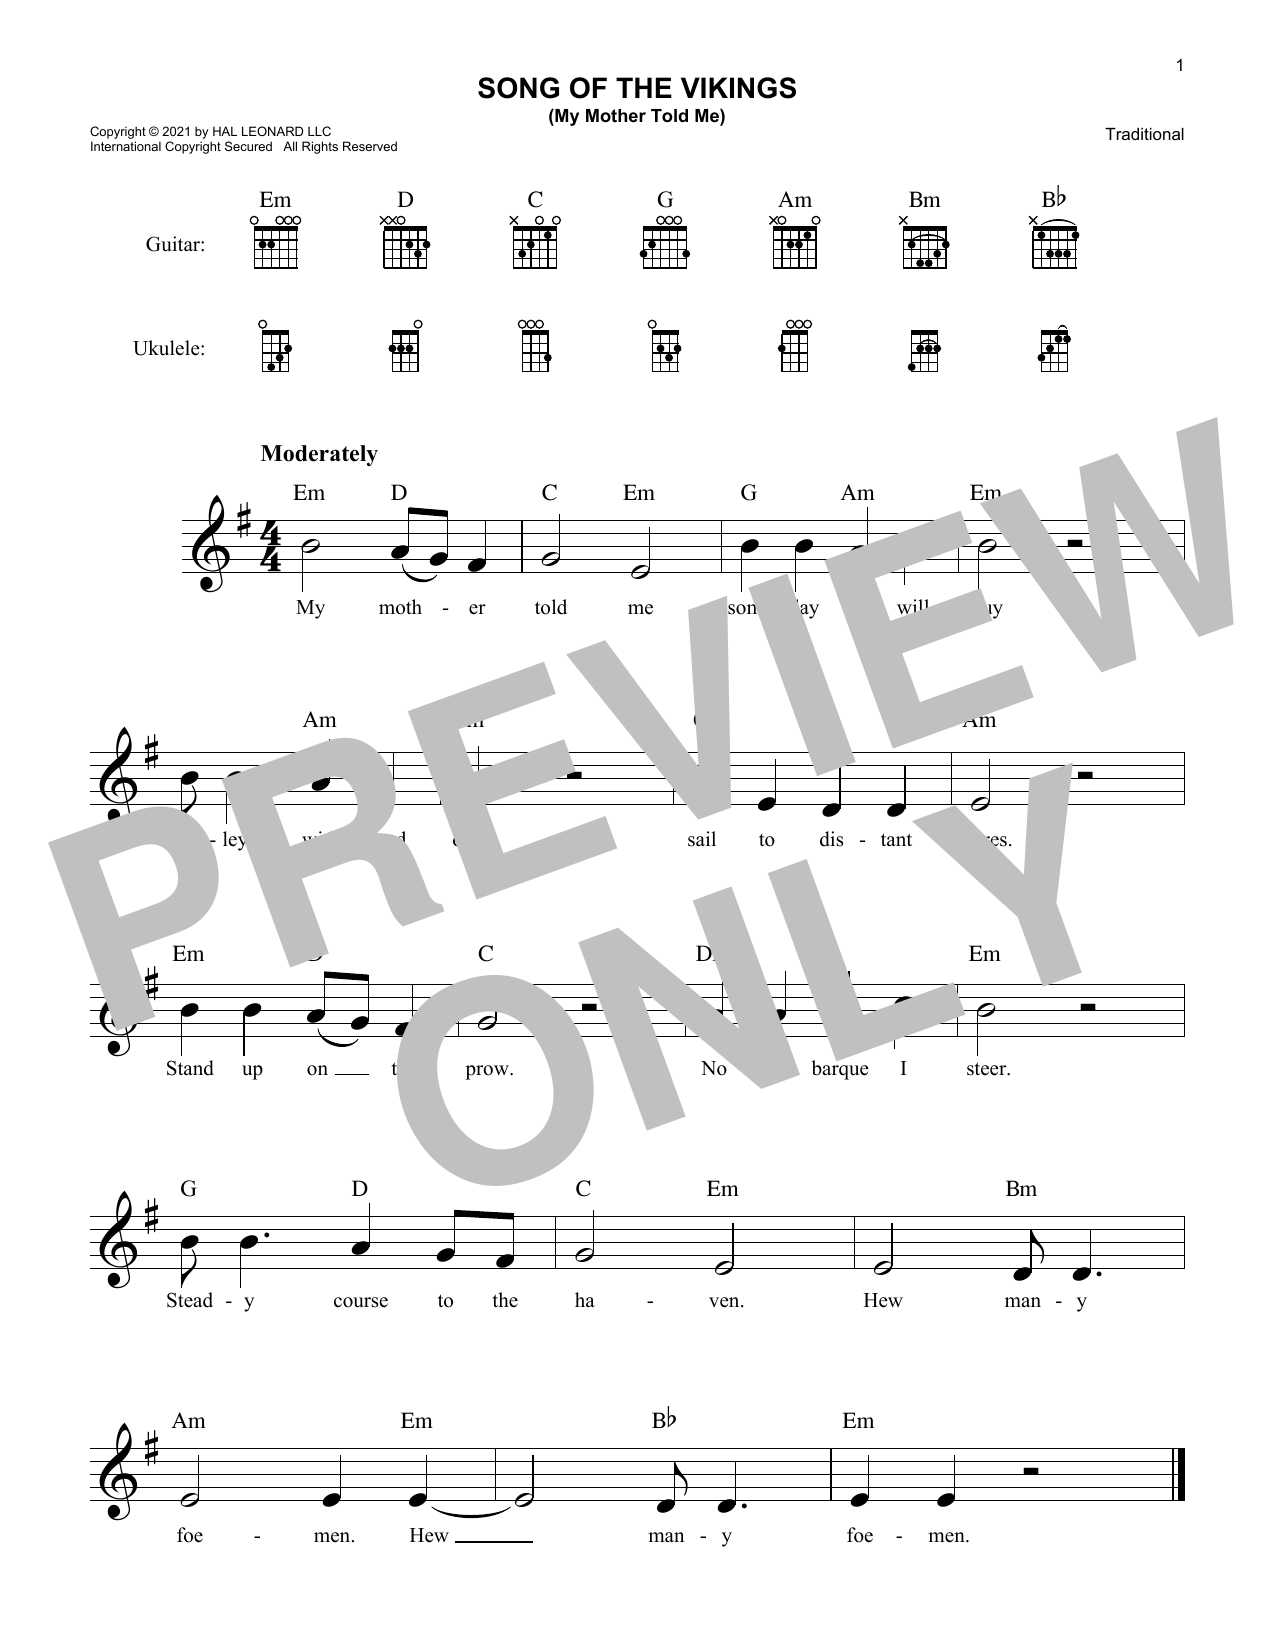 Download Traditional Song Of The Vikings Sheet Music